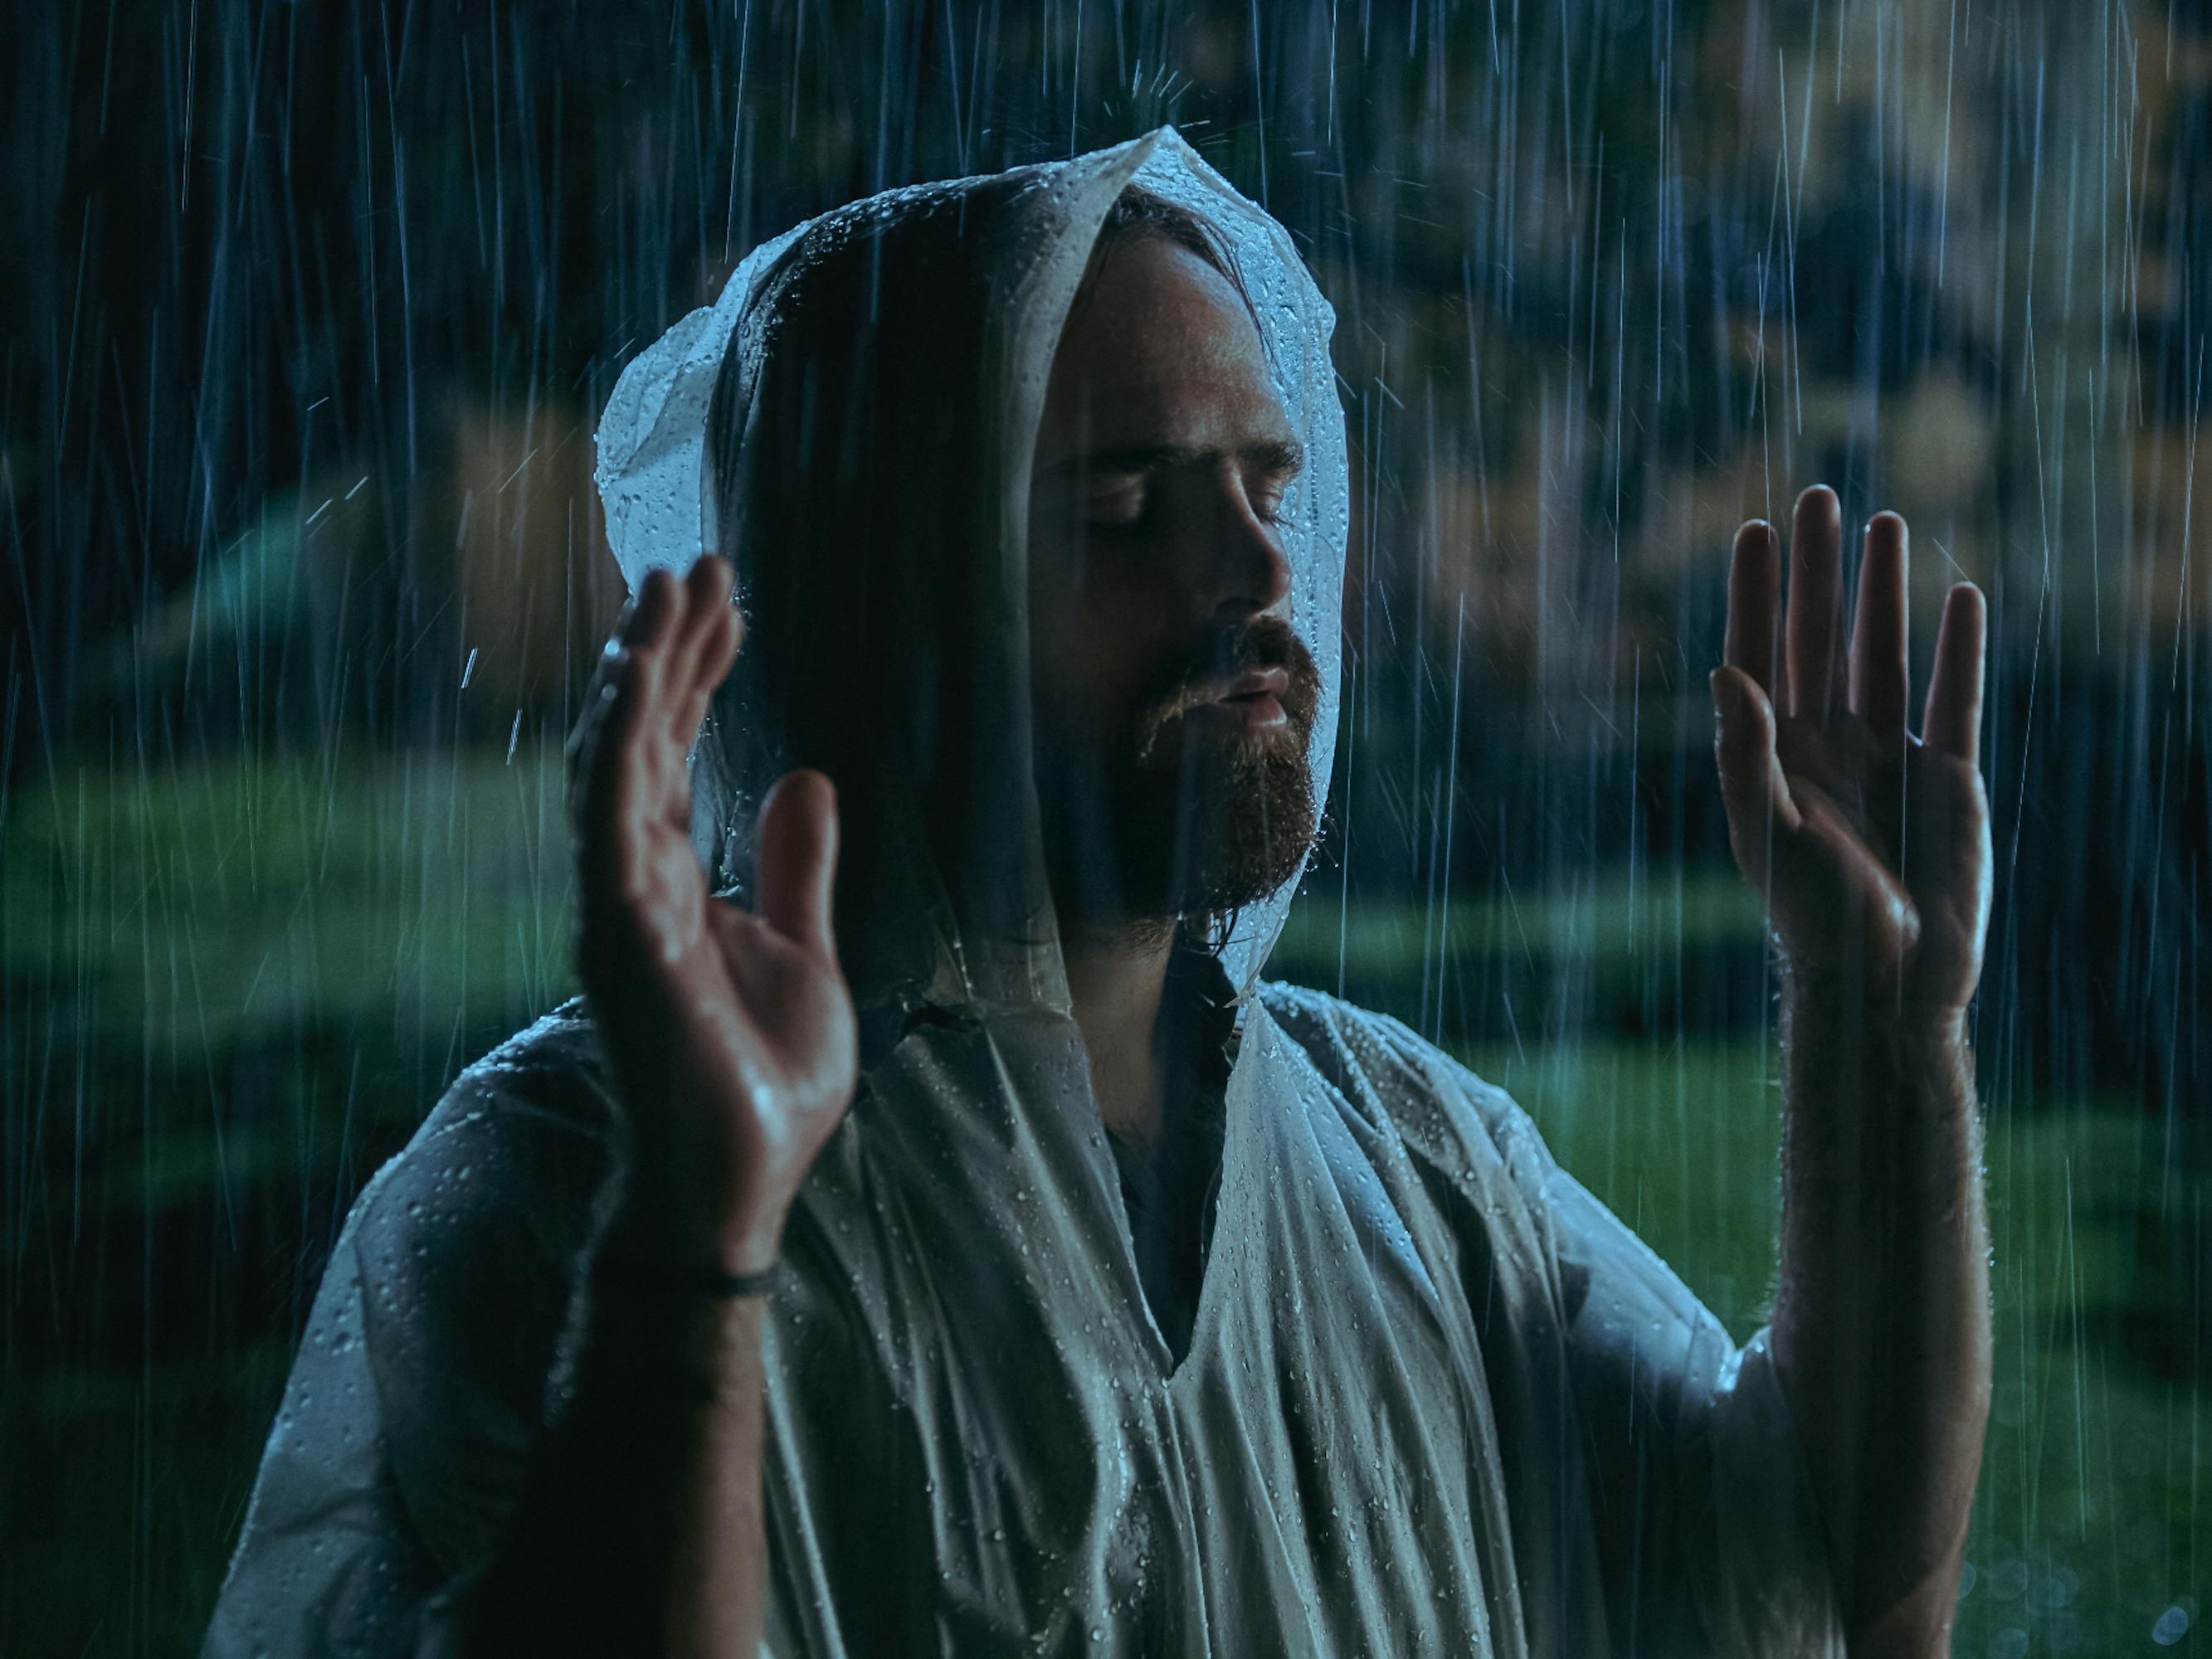 Tadeo (Peter Lanzani) wears a clear poncho and stands in the rain.